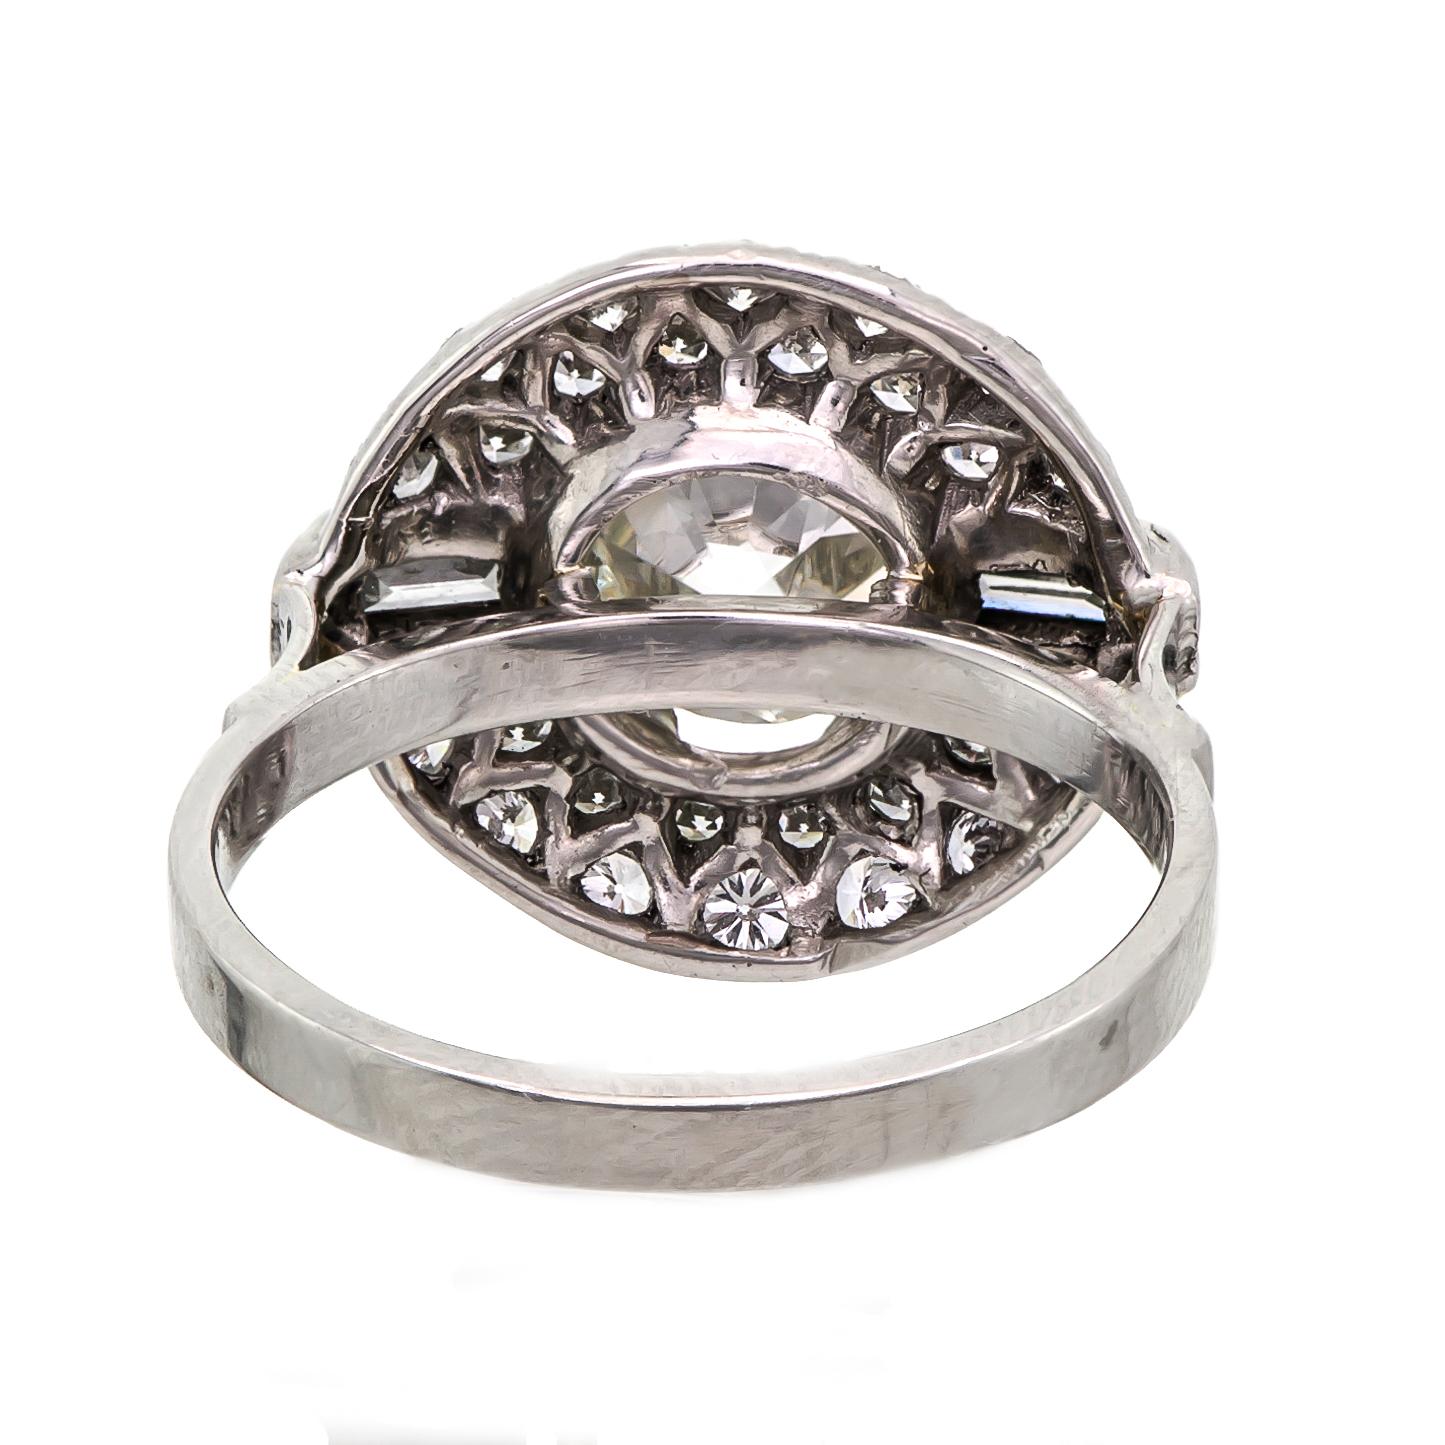 Striking Art Deco Platinum and Diamond Ring Engagement Ring For Sale 1